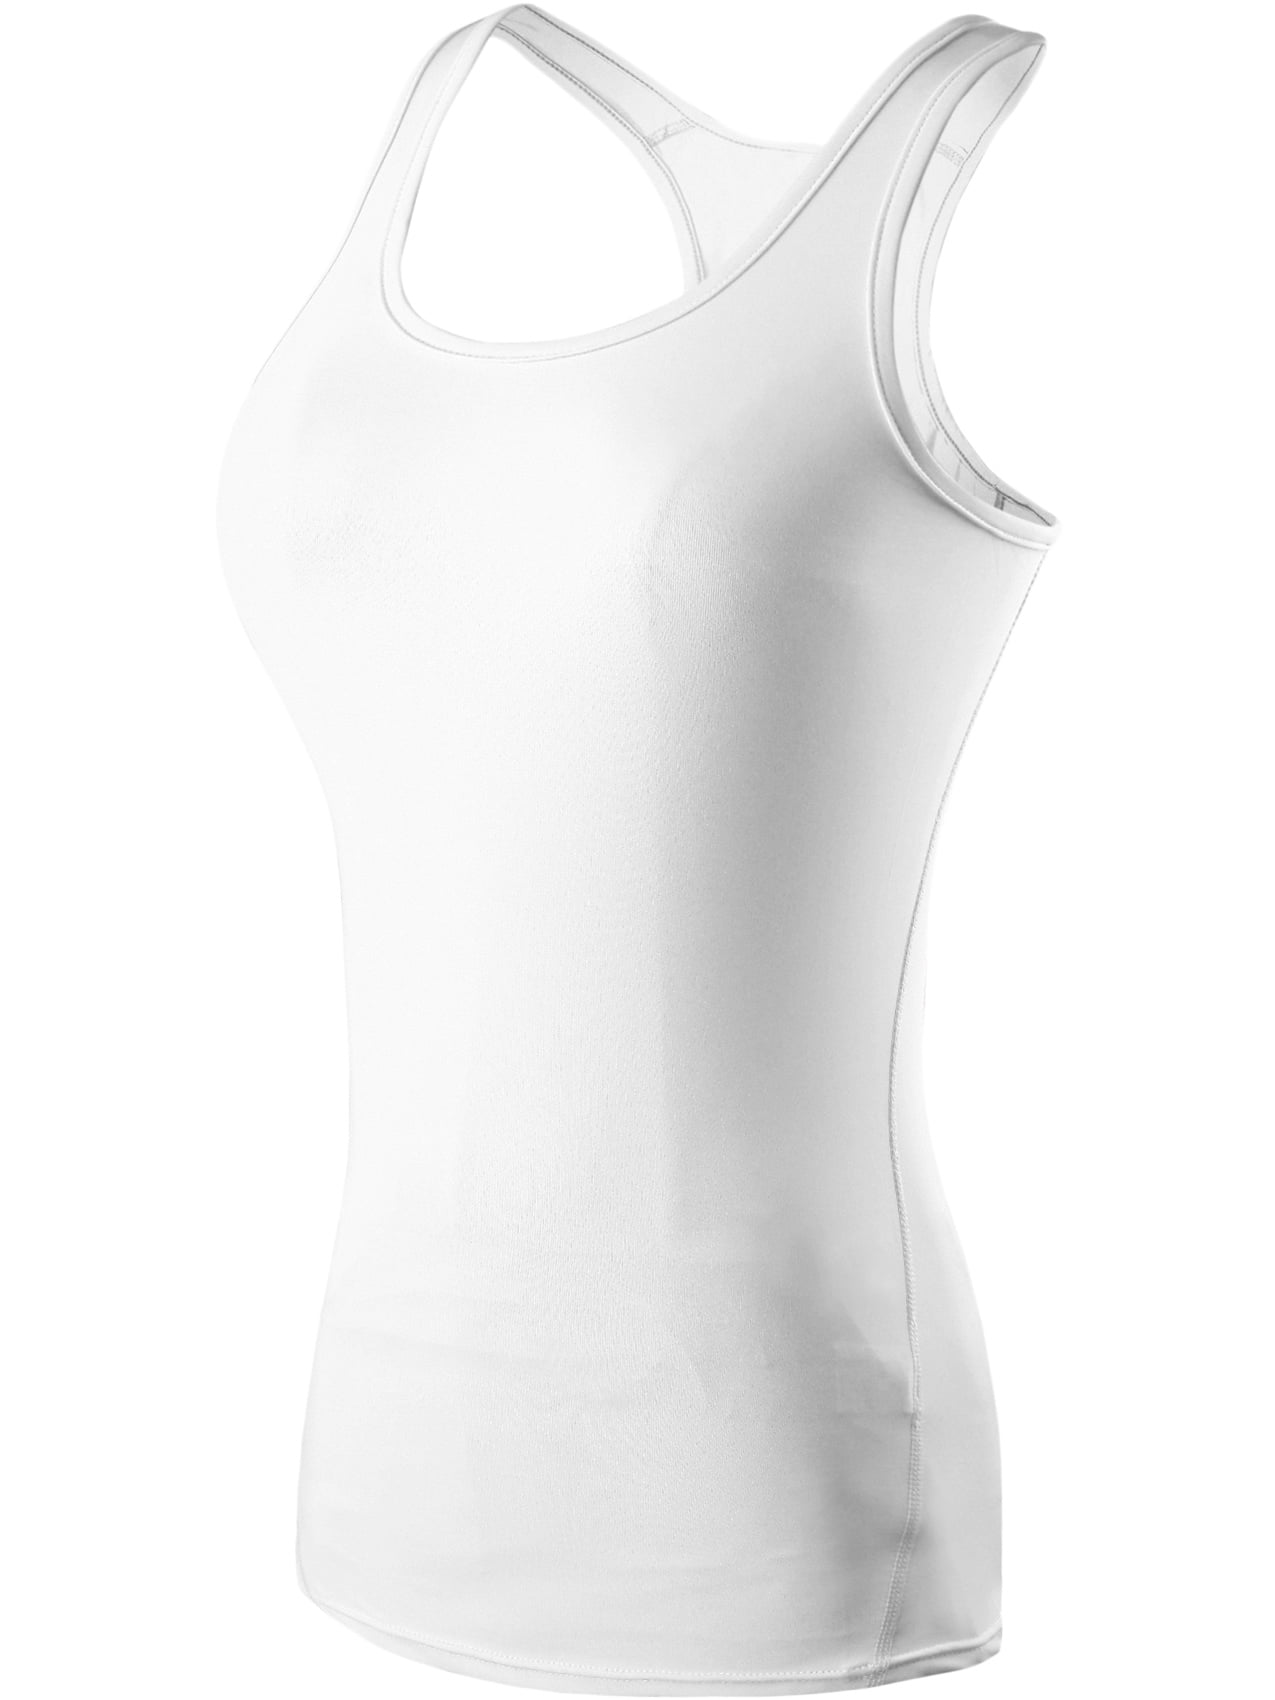 NELEUS Womens Compression Base Layer Dry Fit Tank Top 3 Pack,Black+Gray+ White,US Size XS